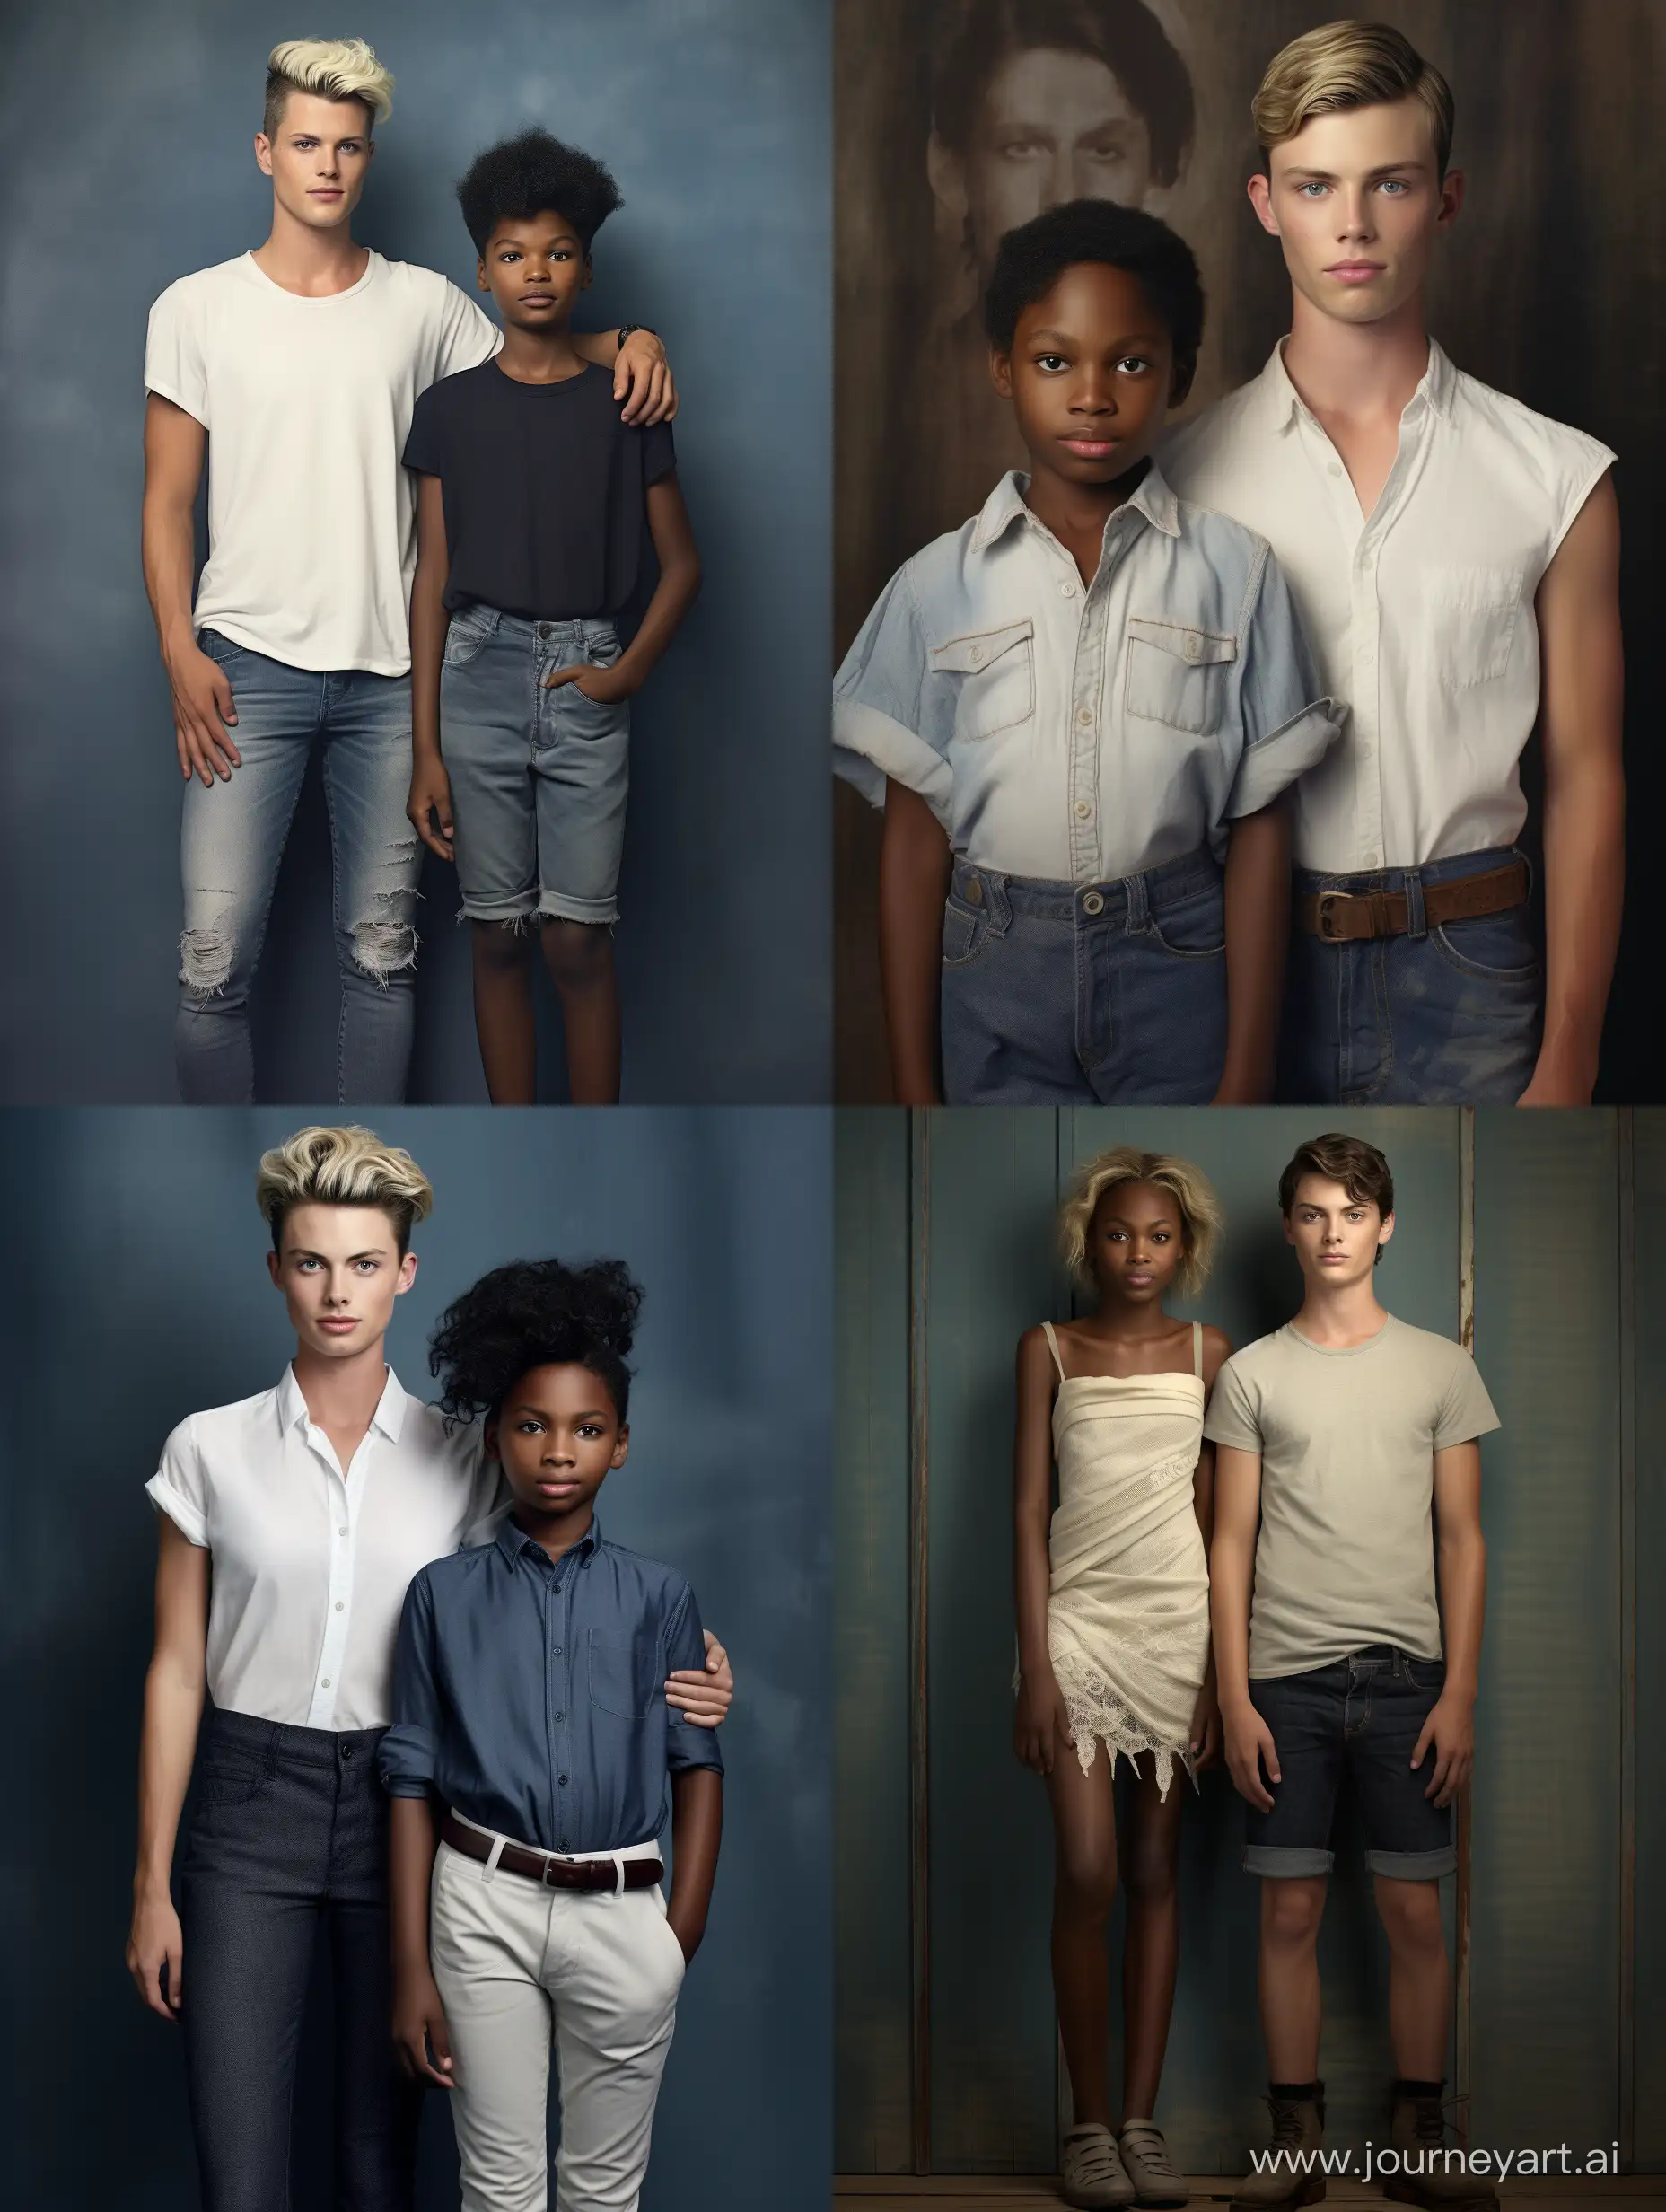 Diverse-Bond-Realistic-Photo-of-Tall-Black-Woman-and-Short-White-Blonde-Boy